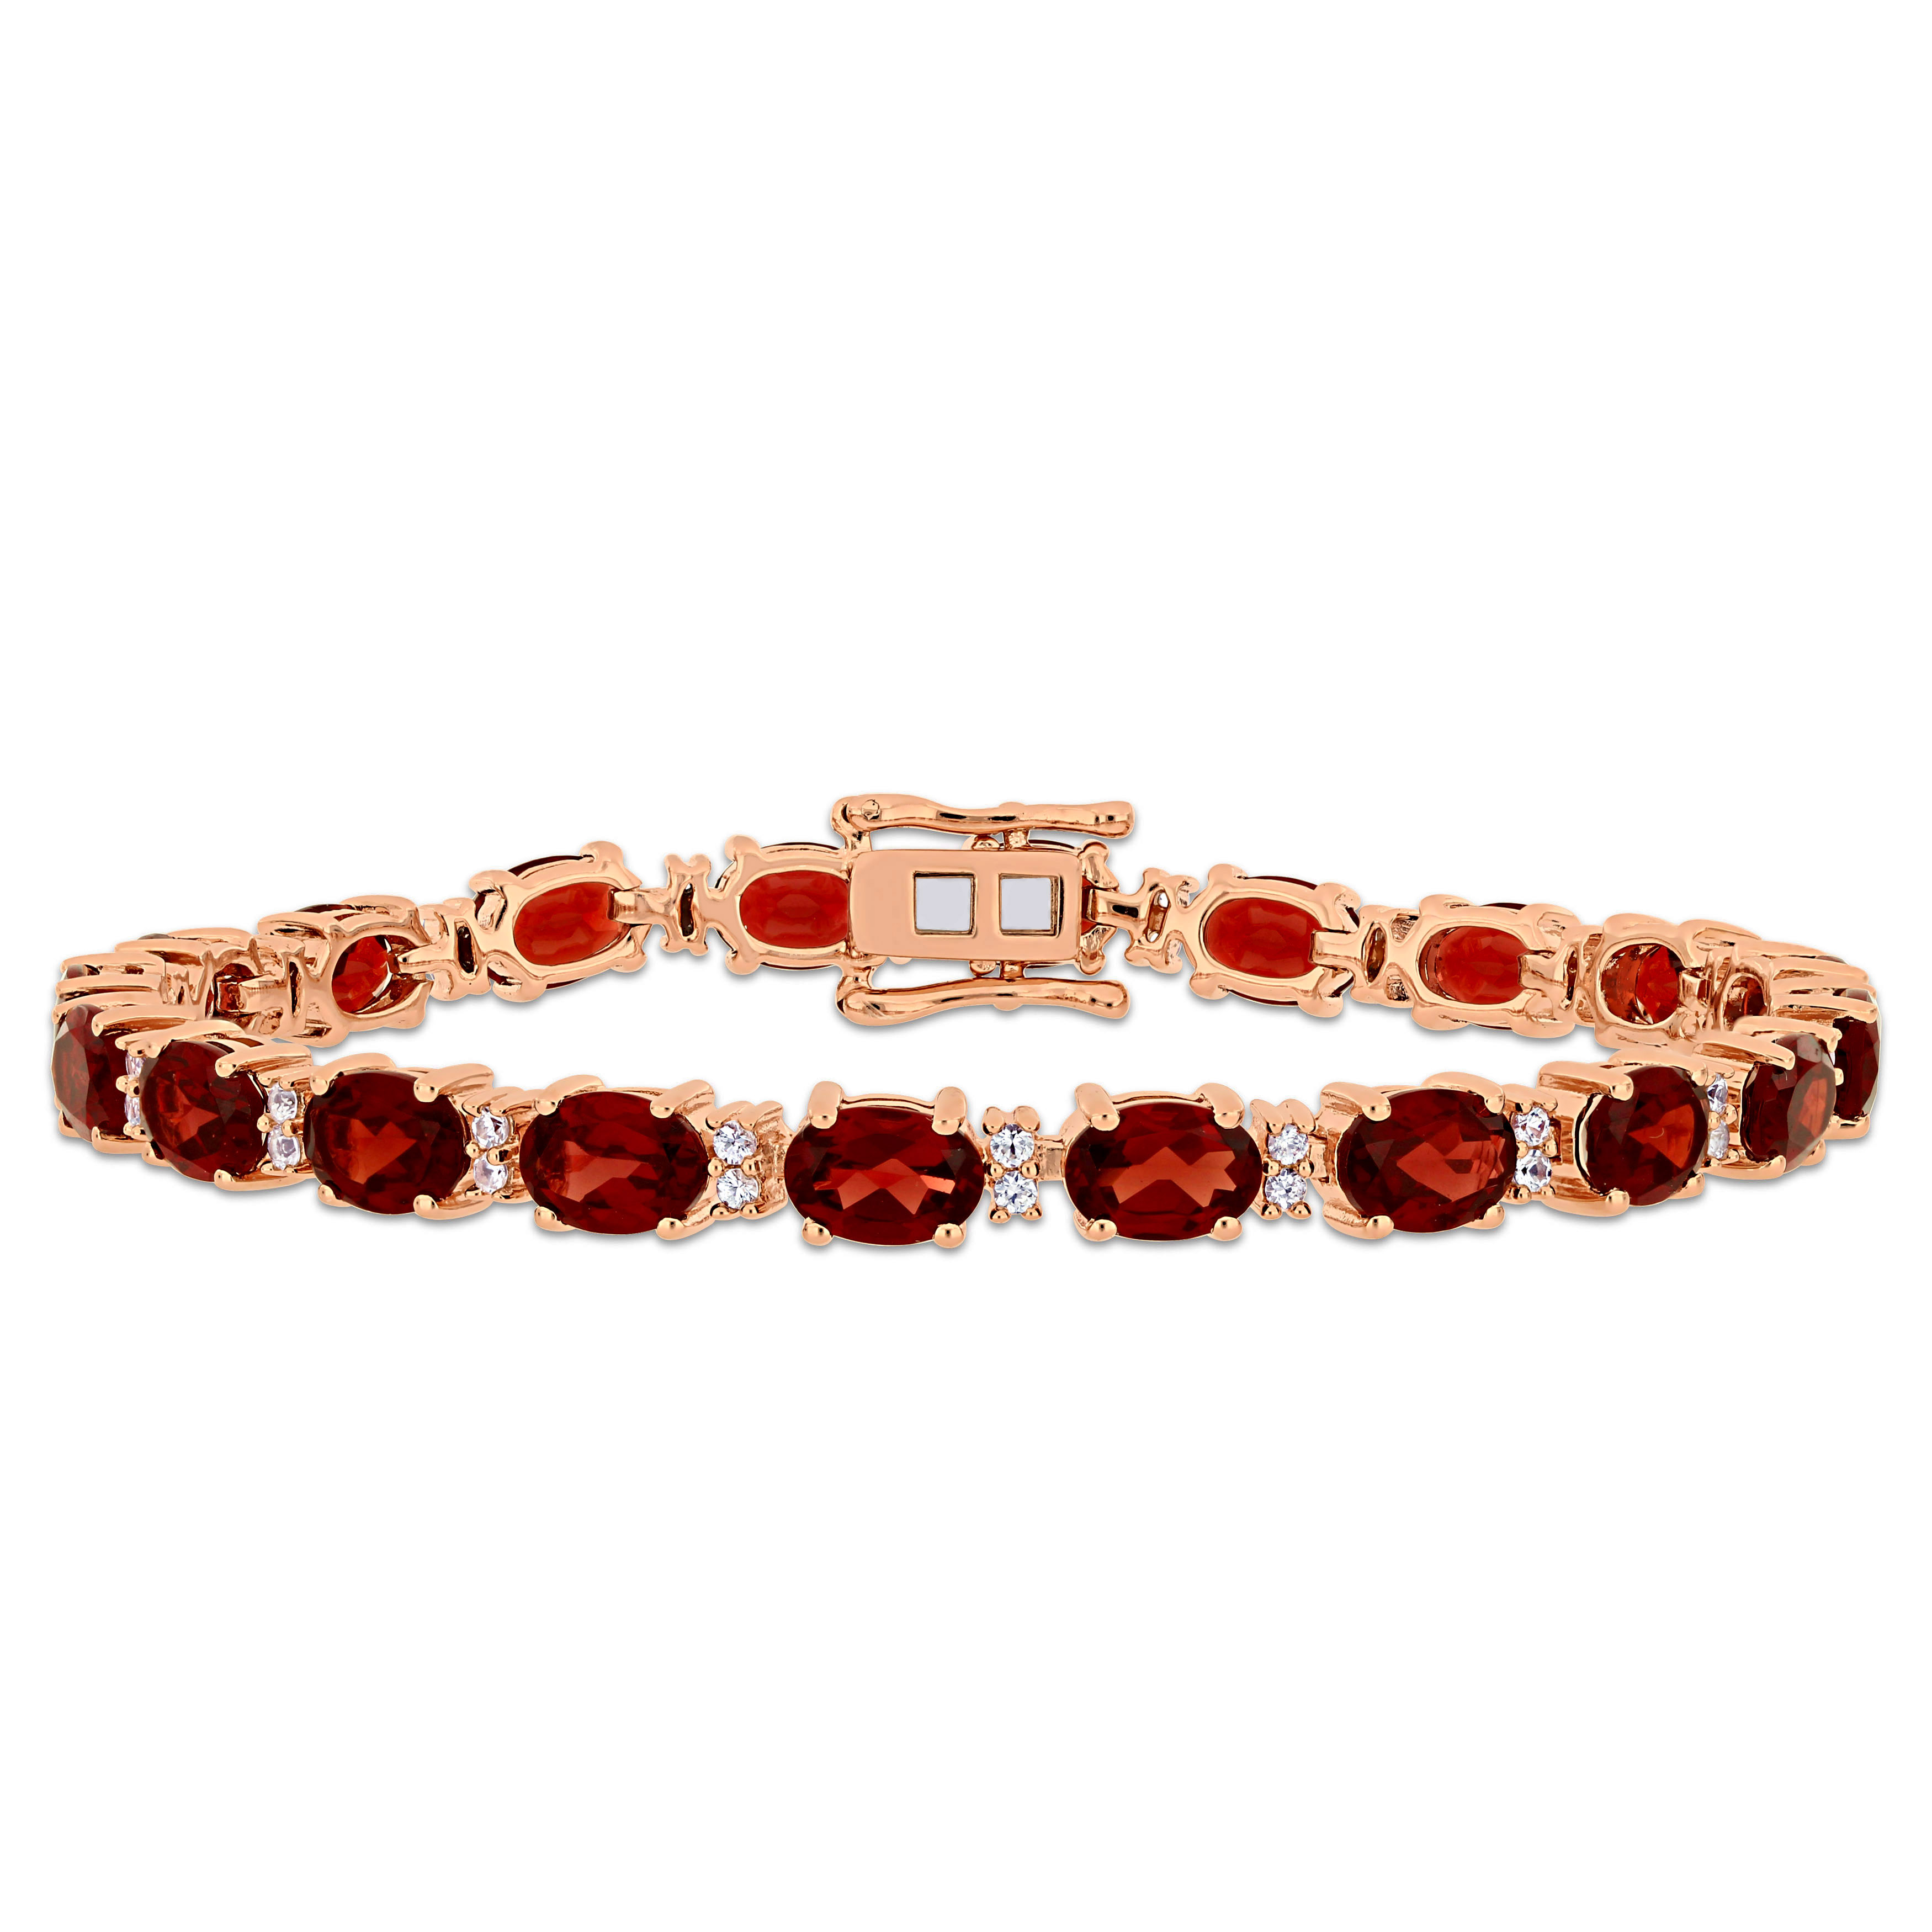 19 5/8 CT TGW Garnet and White Sapphire Tennis Bracelet in Rose Plated Sterling Silver